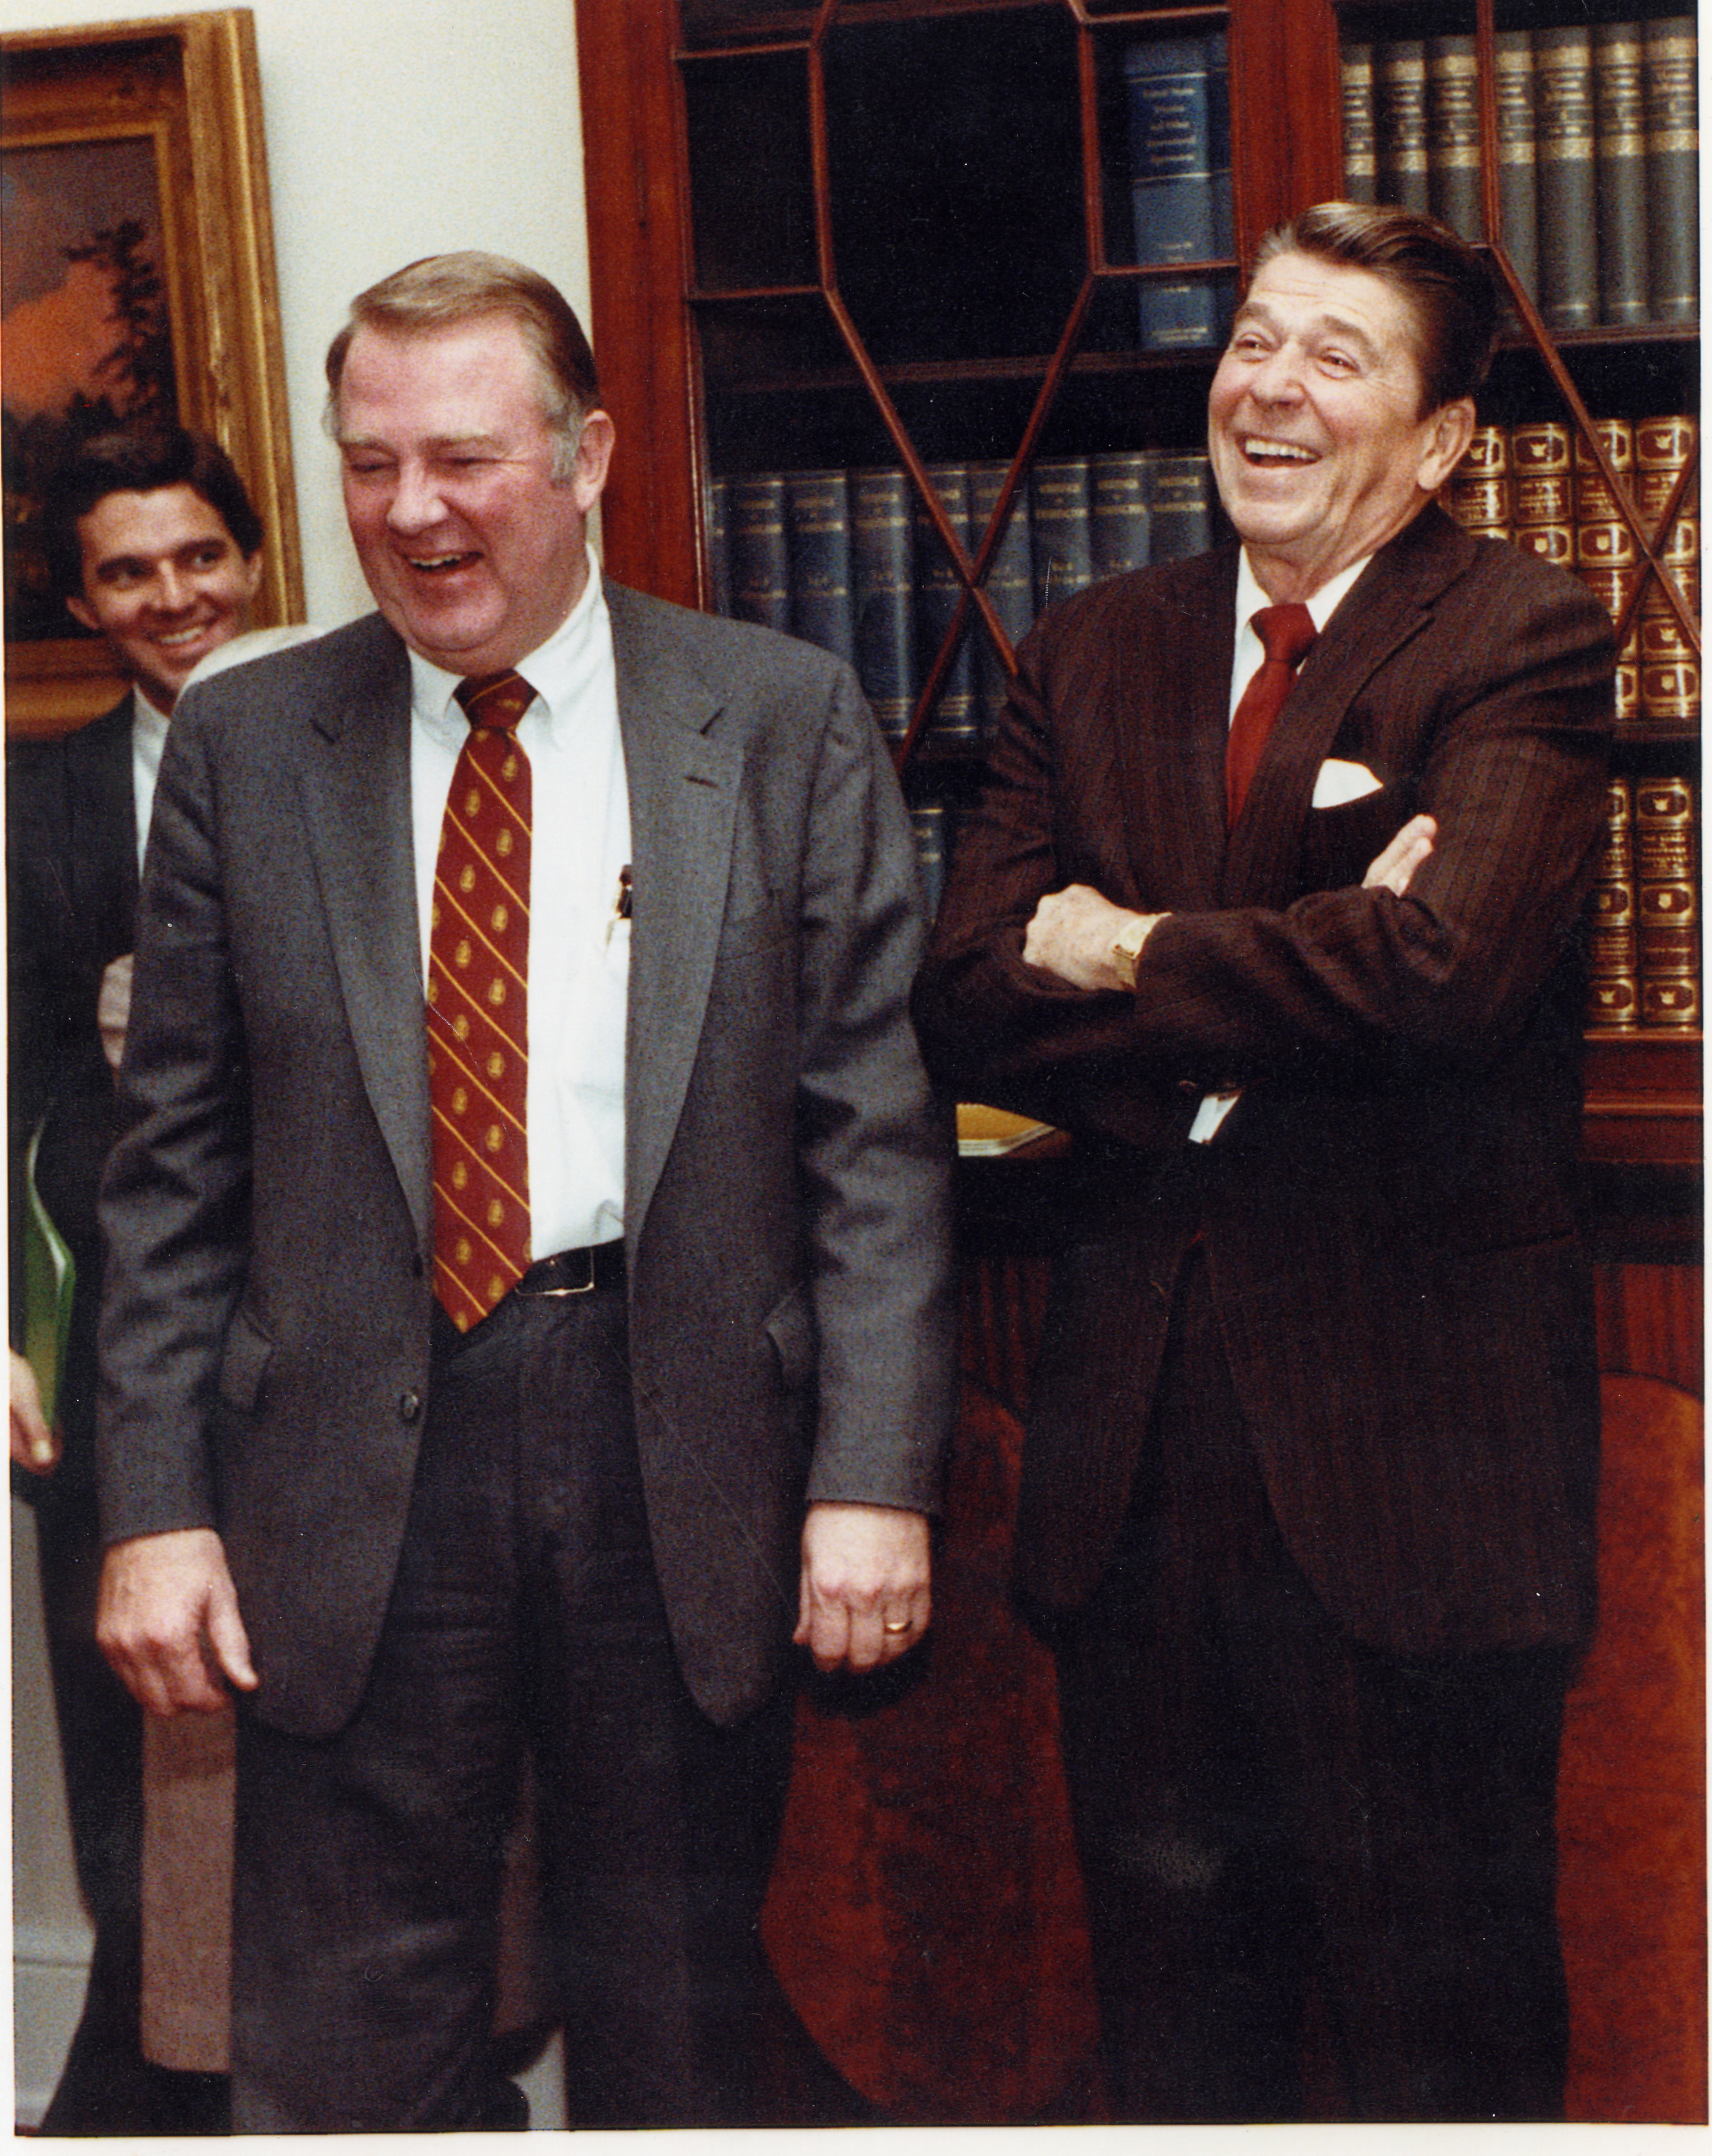 Reagan and Meese